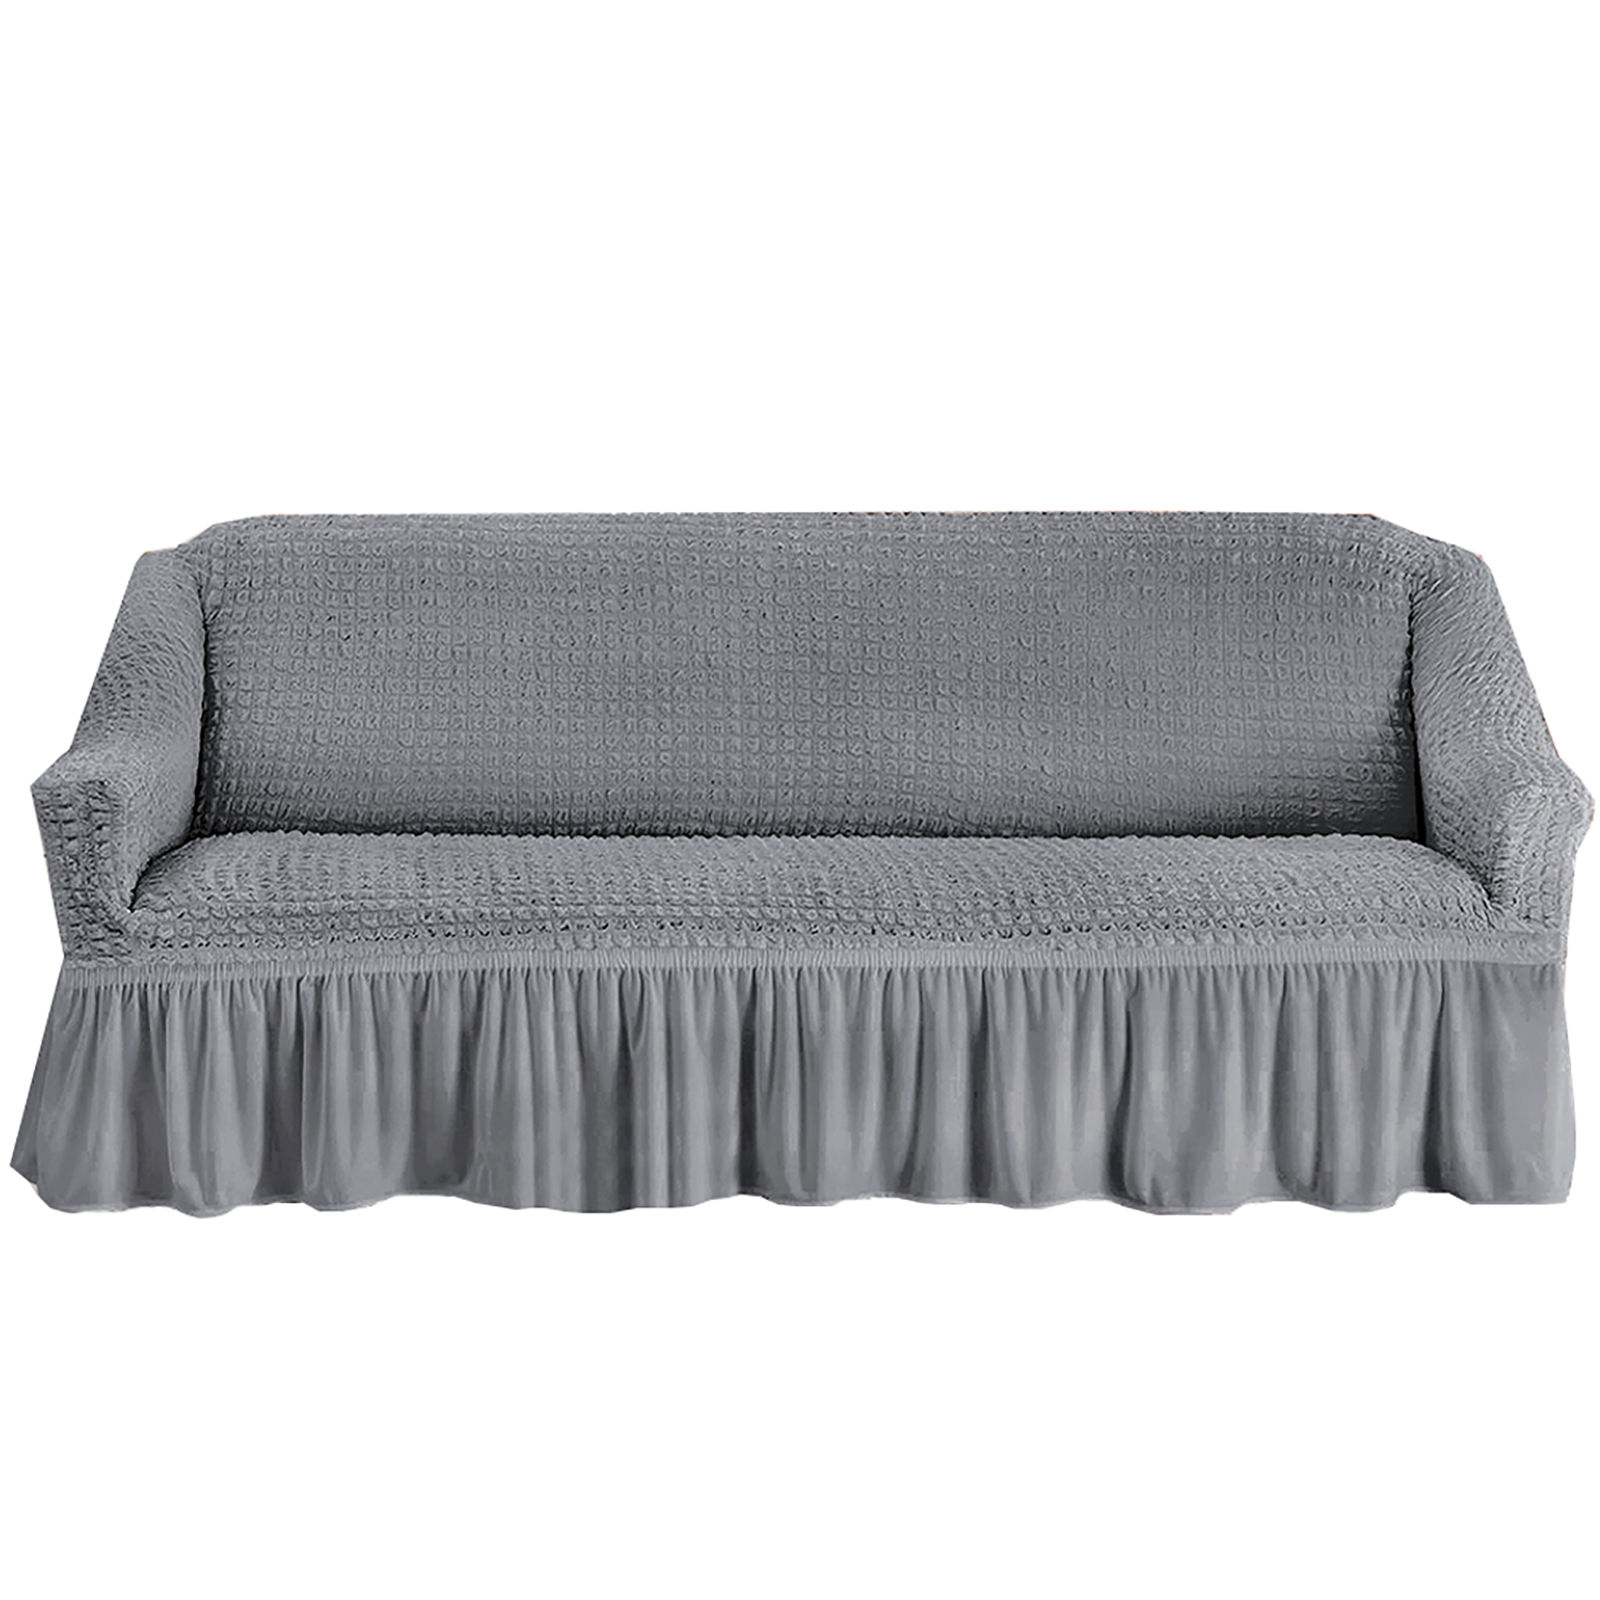 Stretch Sofa Slipcover, 3 Seater Sofa Slipcovers With Skirt With Armless Soft Sofa Cover Elastic Straps Sofa Slipcover For Living Room Kids Pets-Gray B-Small